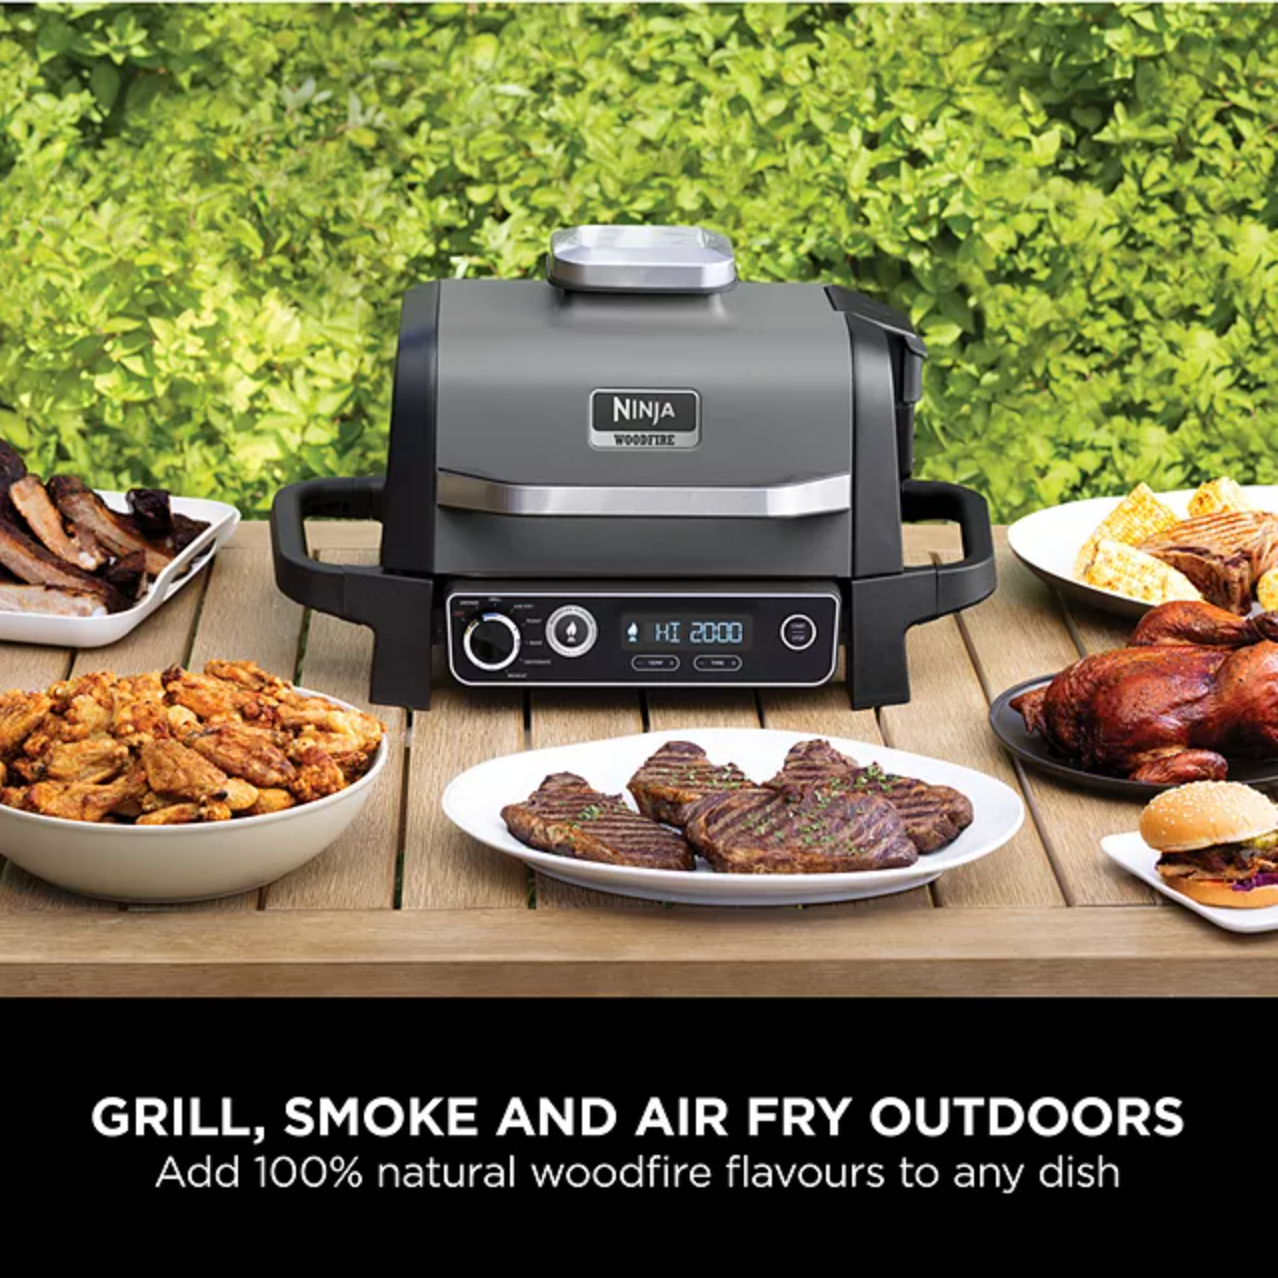 Ninja Woodfire Outdoor Grill 1st Look & Cook Air Fryer Smoked Potato Wedges  